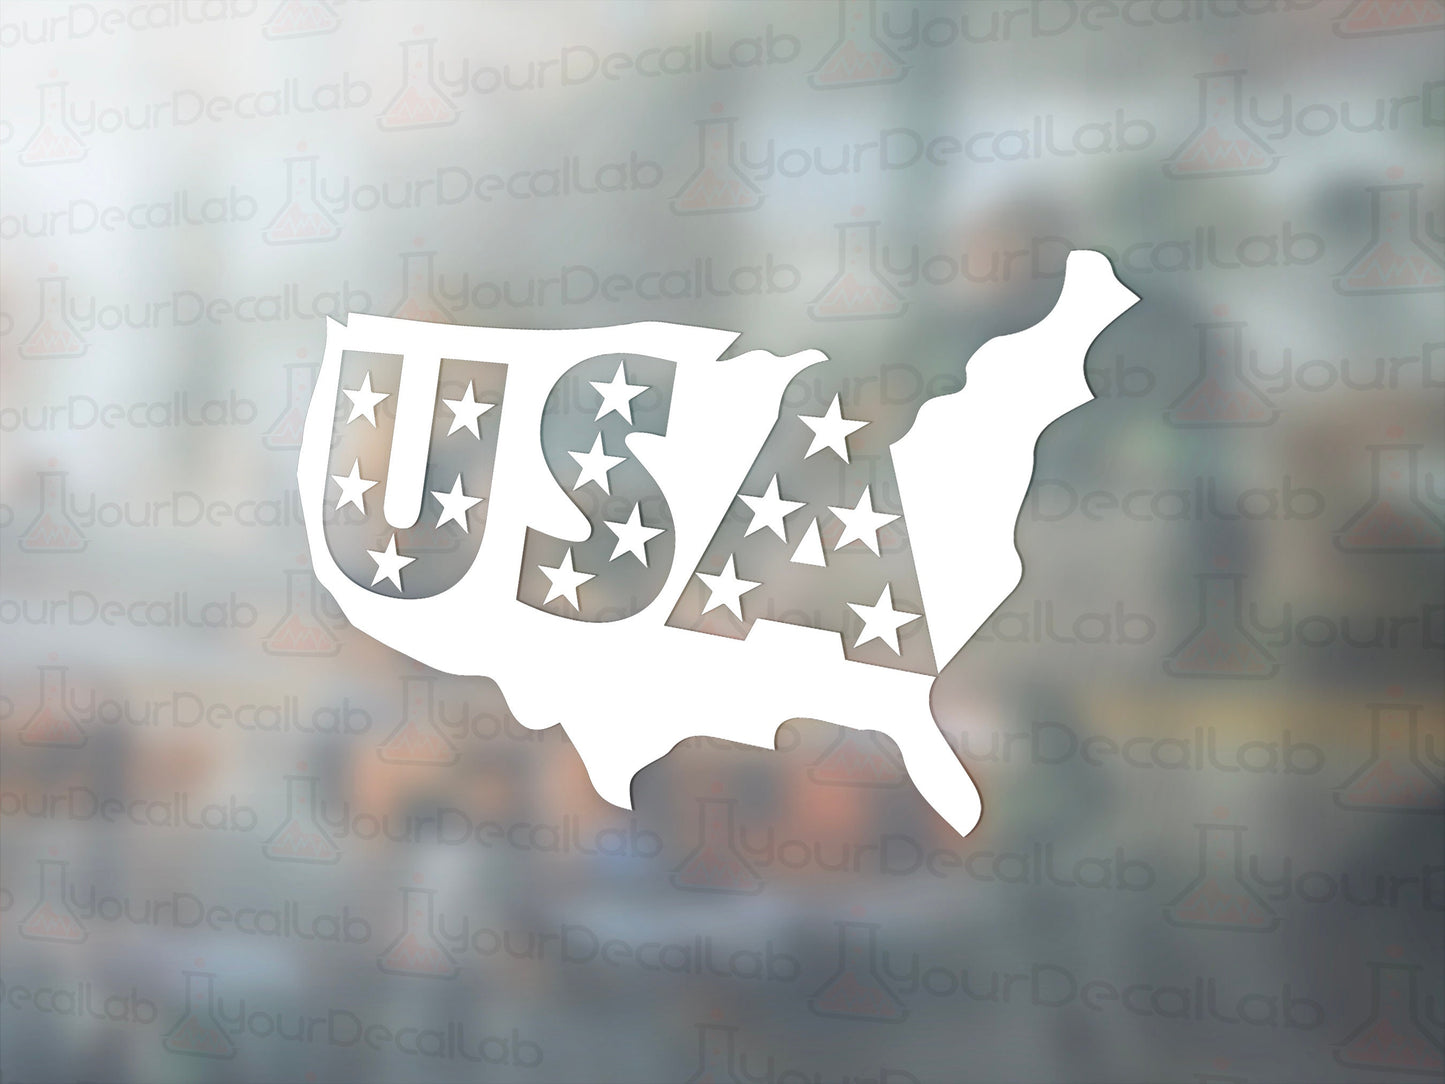 U.S.A. Decal - Many Colors & Sizes